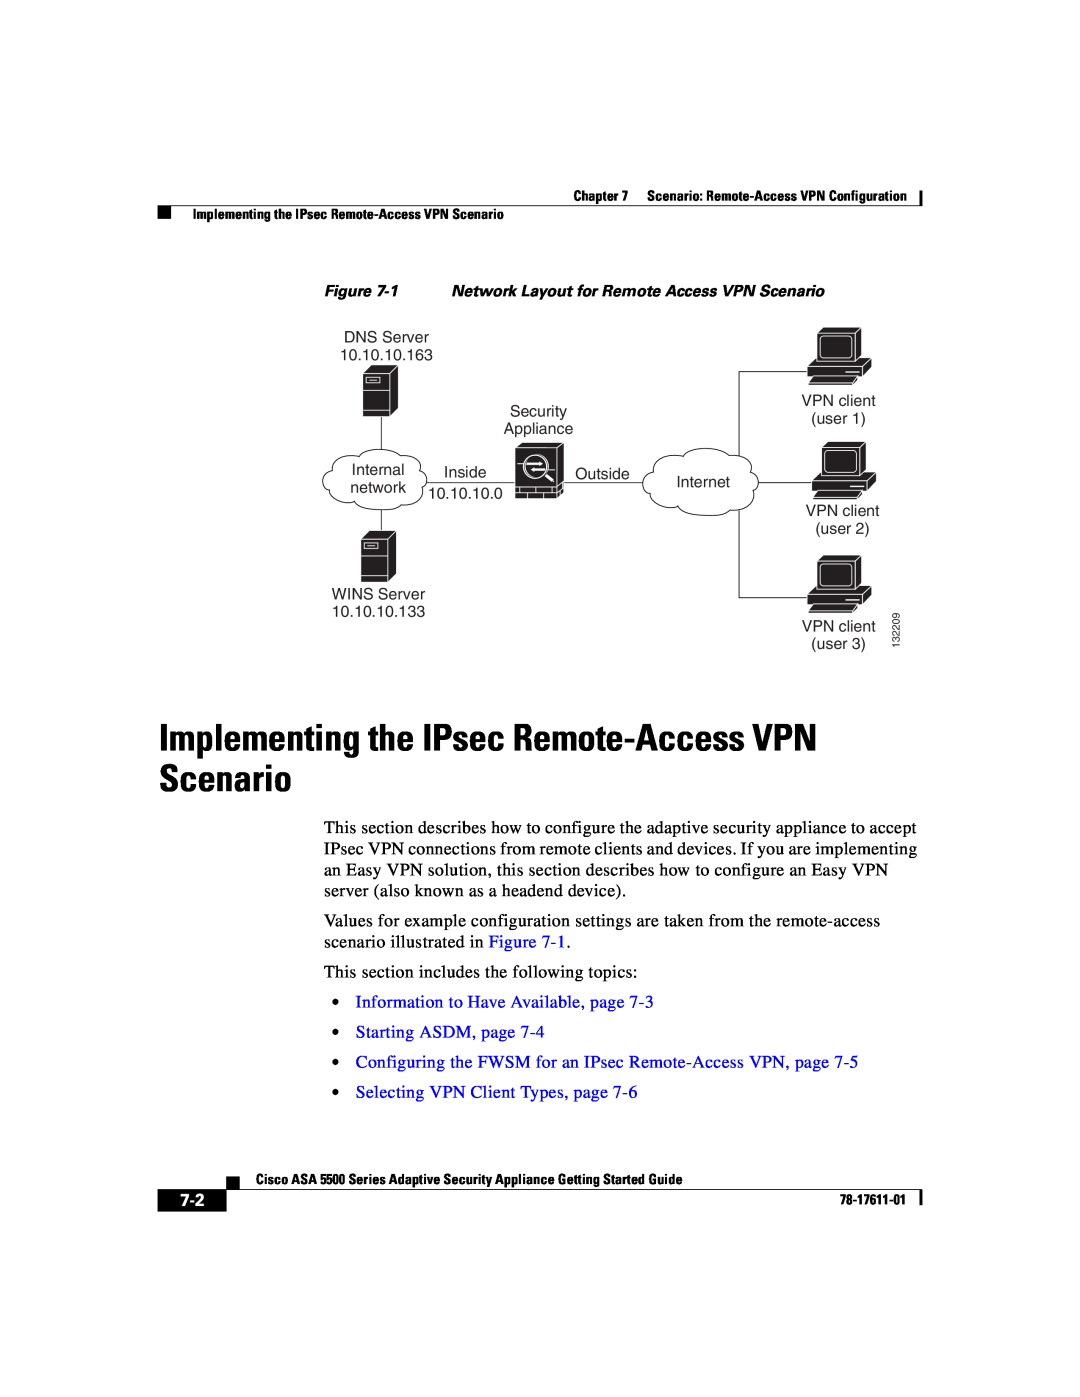 Cisco Systems ASA 5500 manual Implementing the IPsec Remote-AccessVPN Scenario, •Information to Have Available, page 